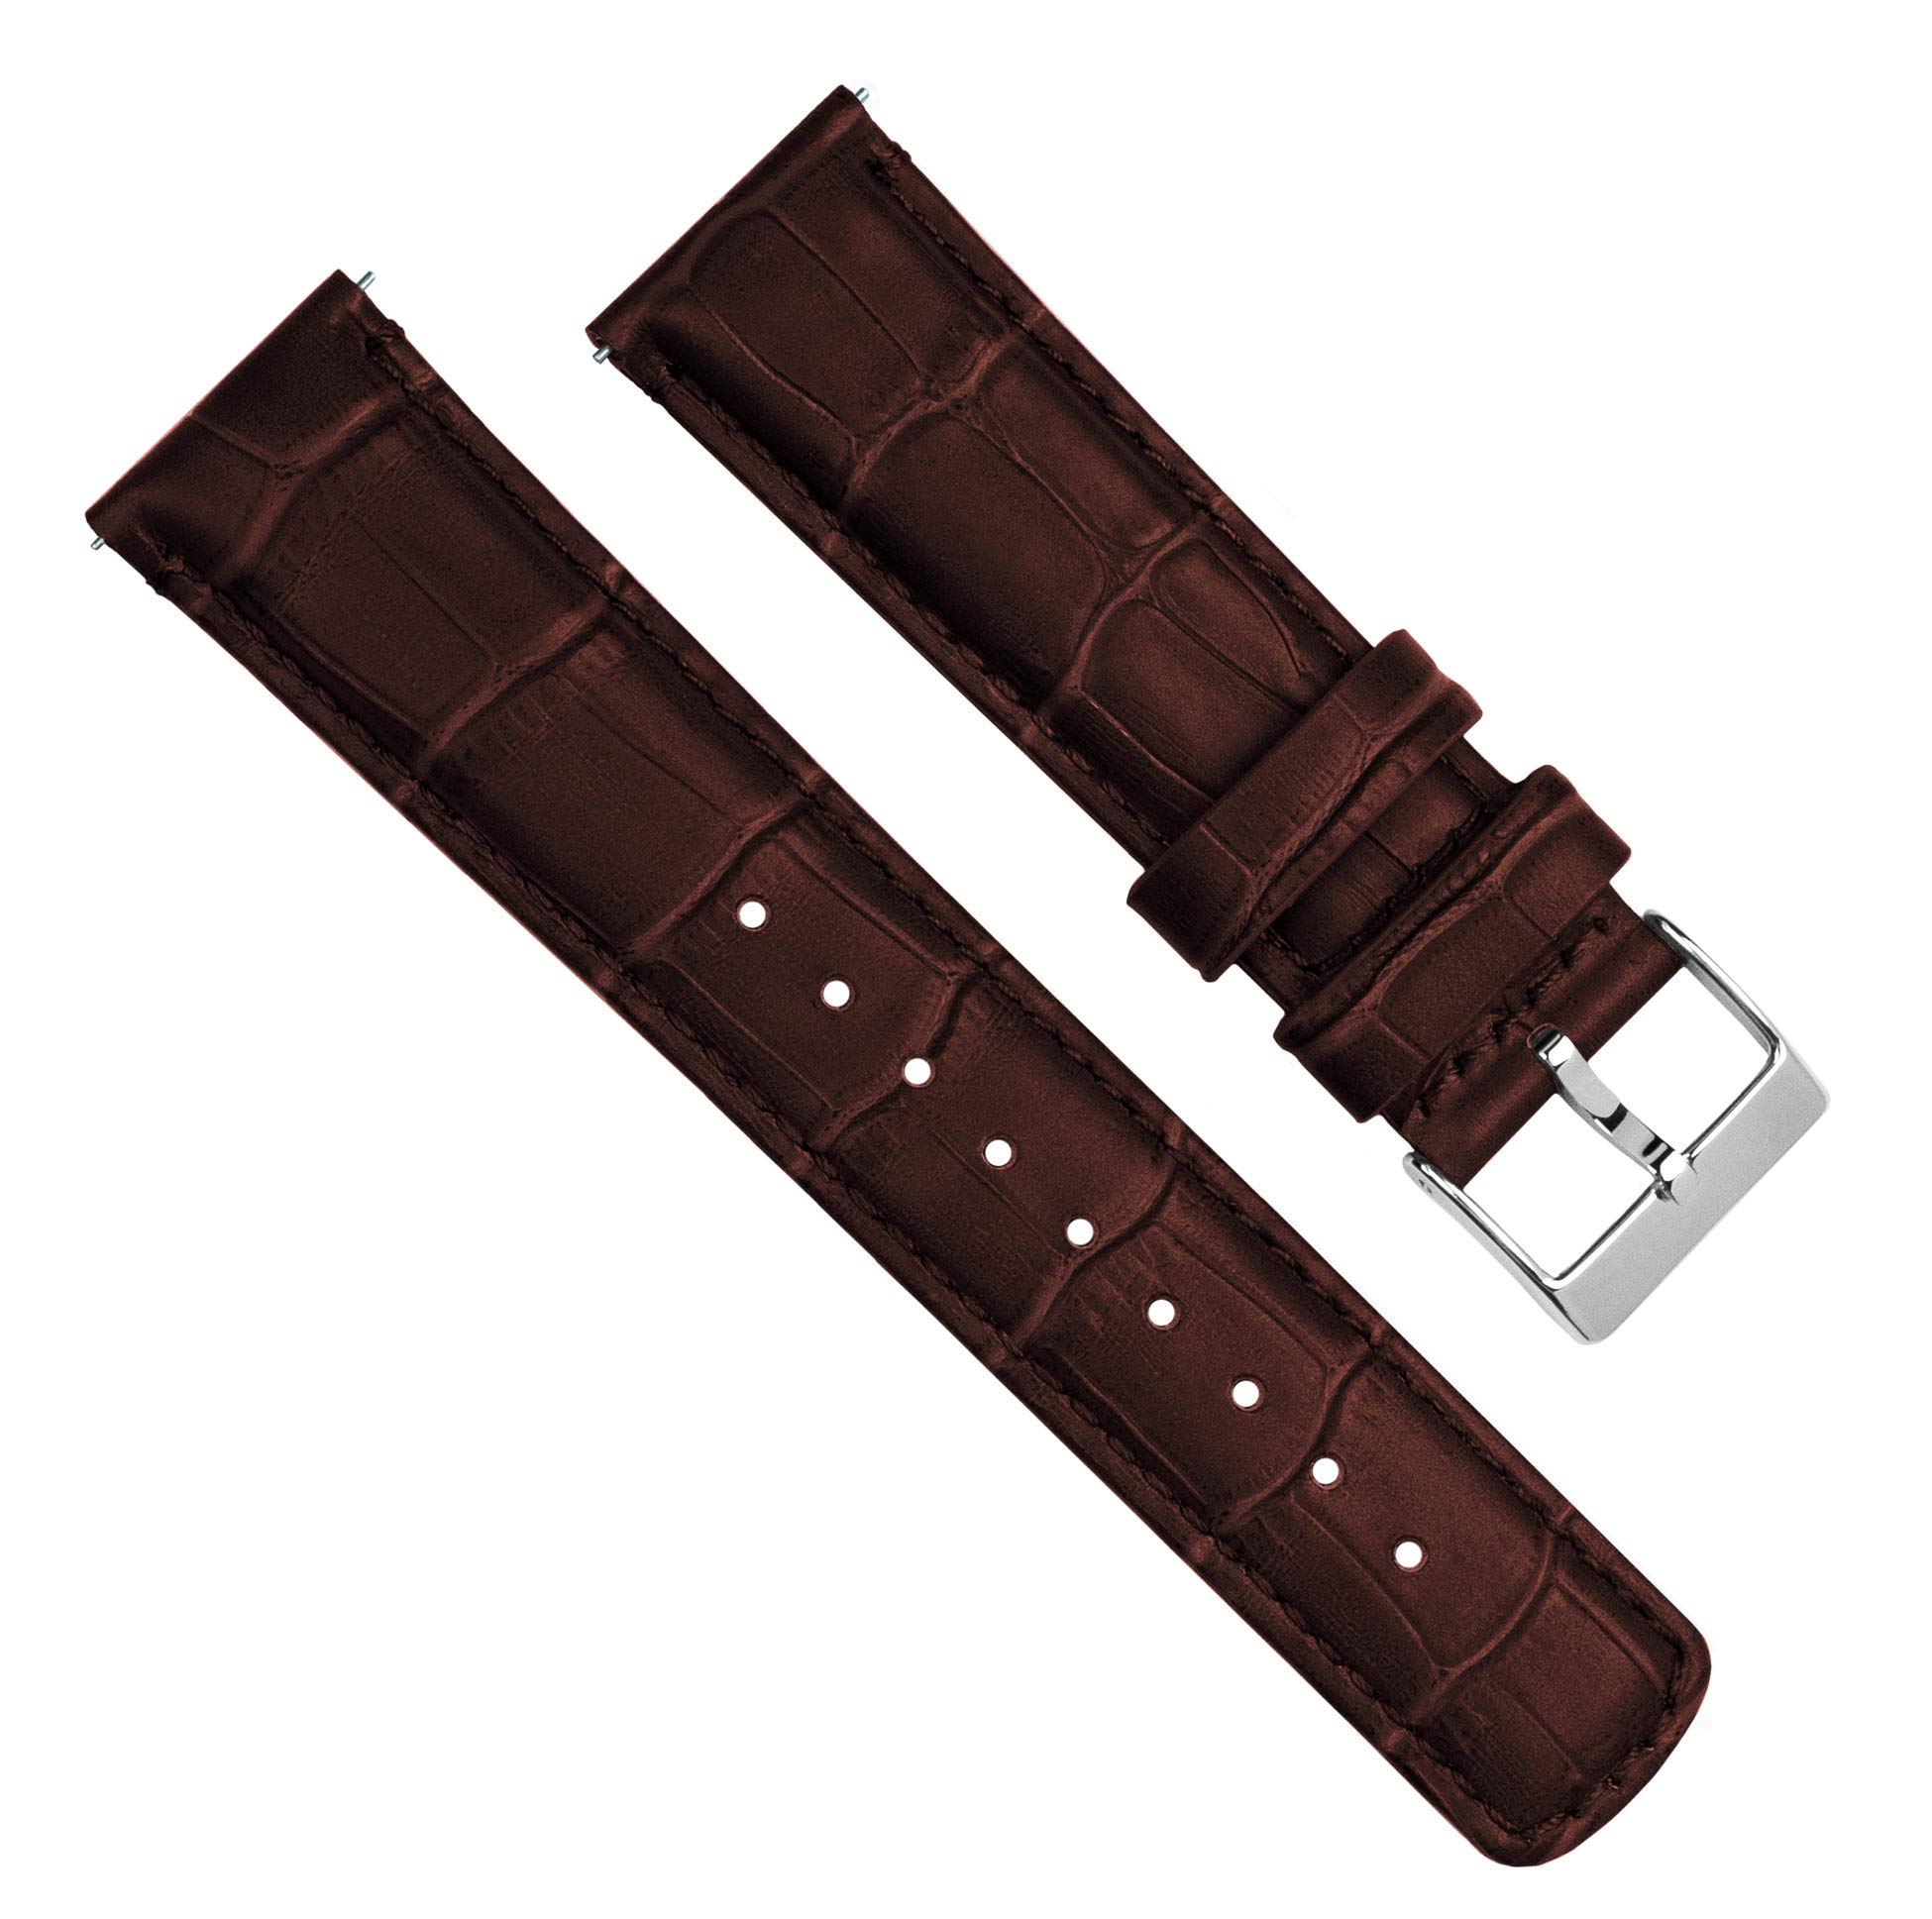 14mm Coffee Brown - BARTON Alligator Grain - Quick Release Leather Watch Bands